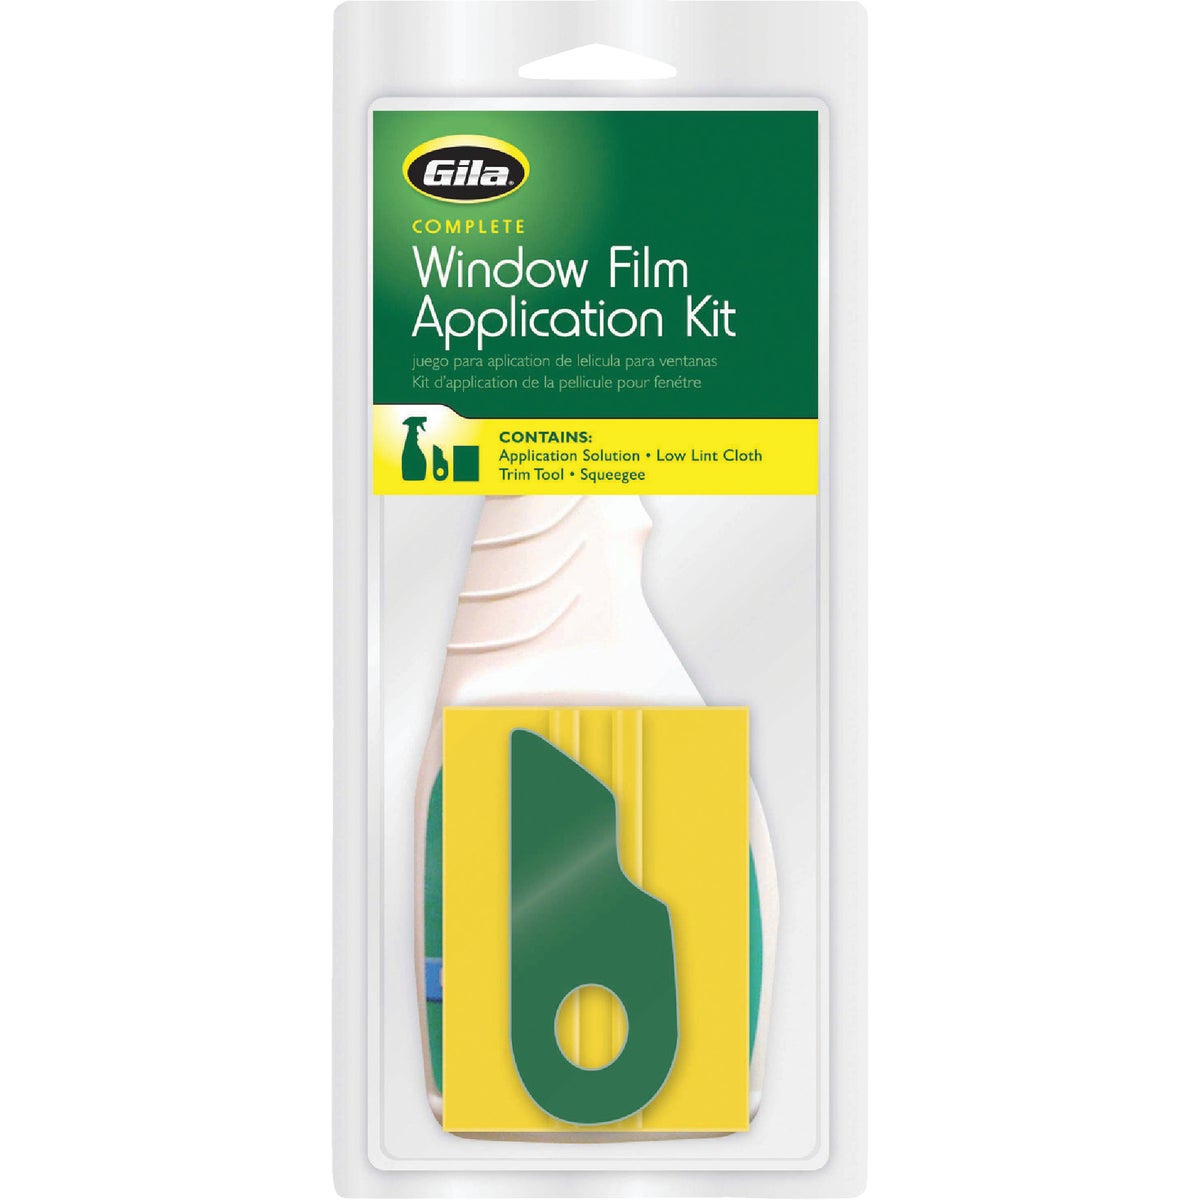 Item 260162, The complete window film application kit includes all tools needed to apply